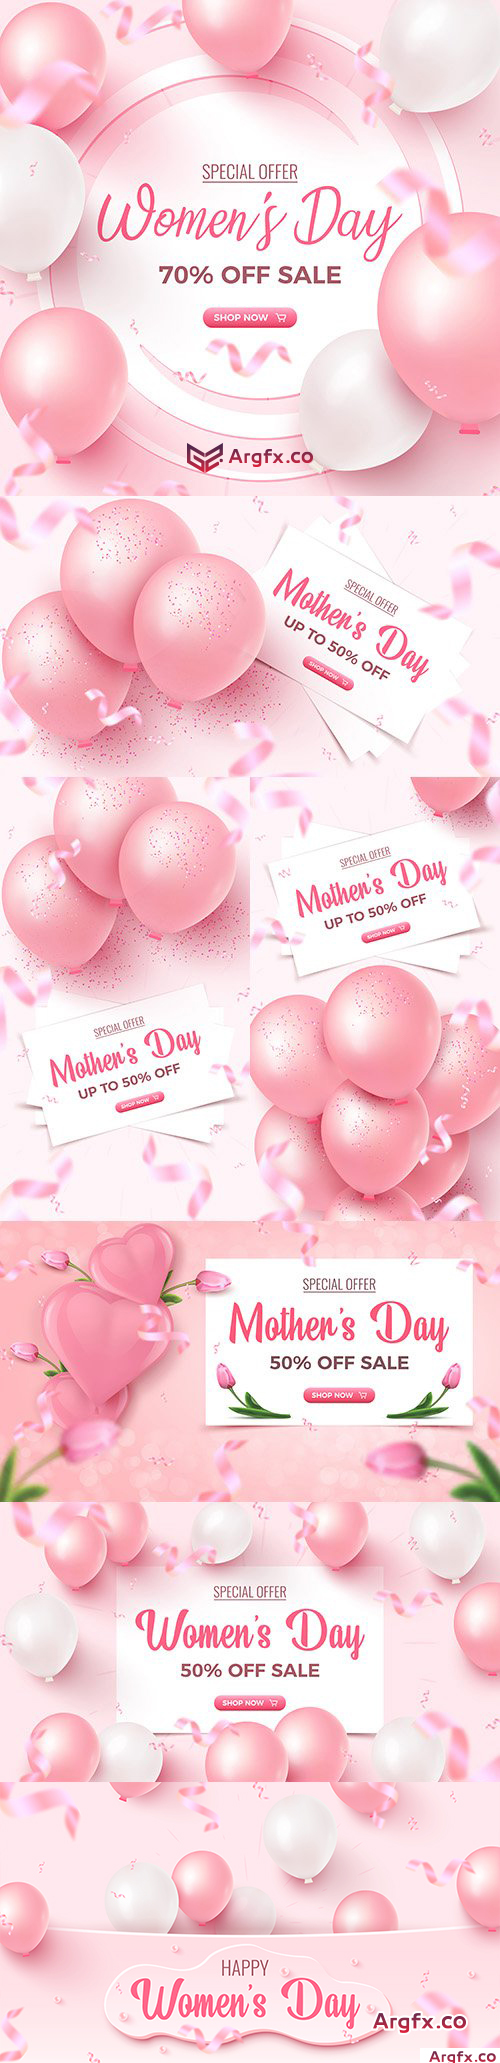 Mother 's Day special offer design poster in pink